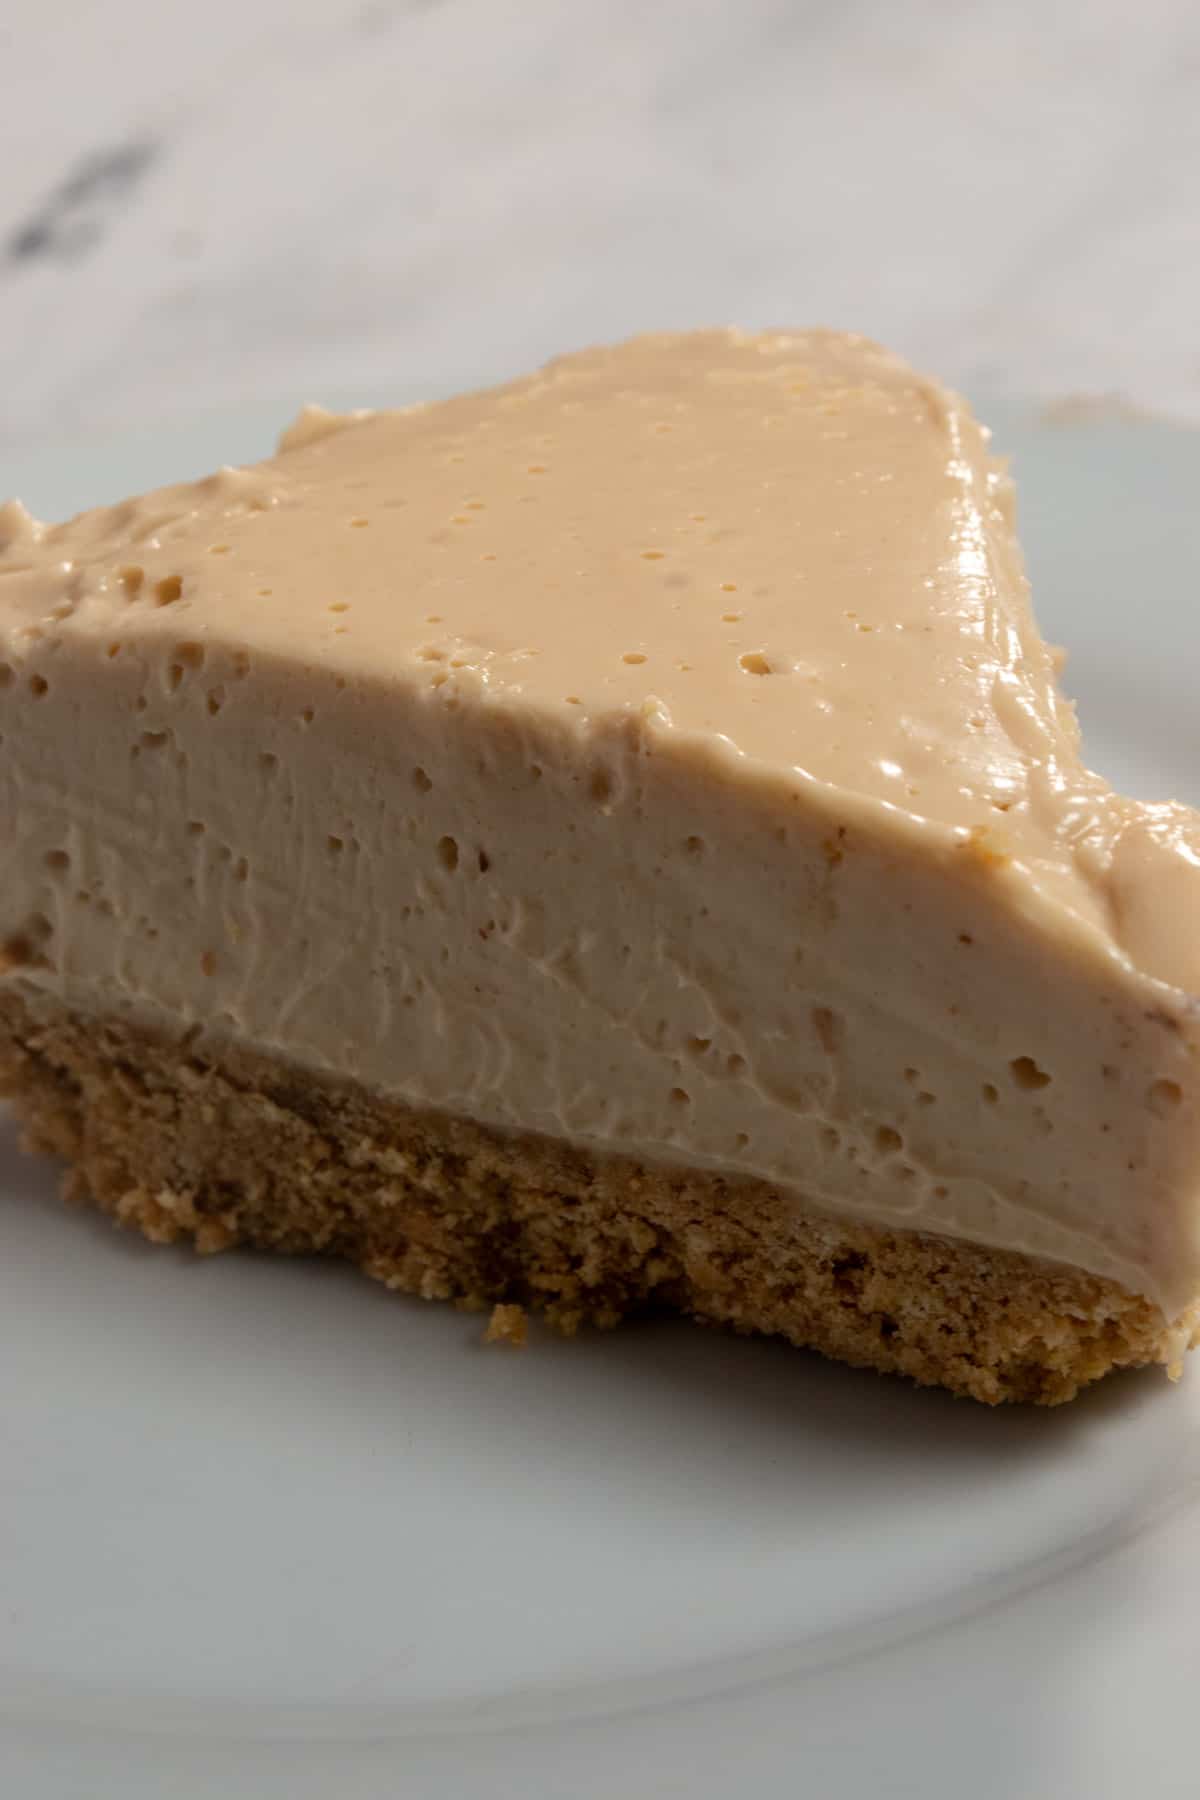 A large slice of my vegan peanut butter cheesecake on a small, white saucer. This slice hasn't been decorated with the chocolate topping.